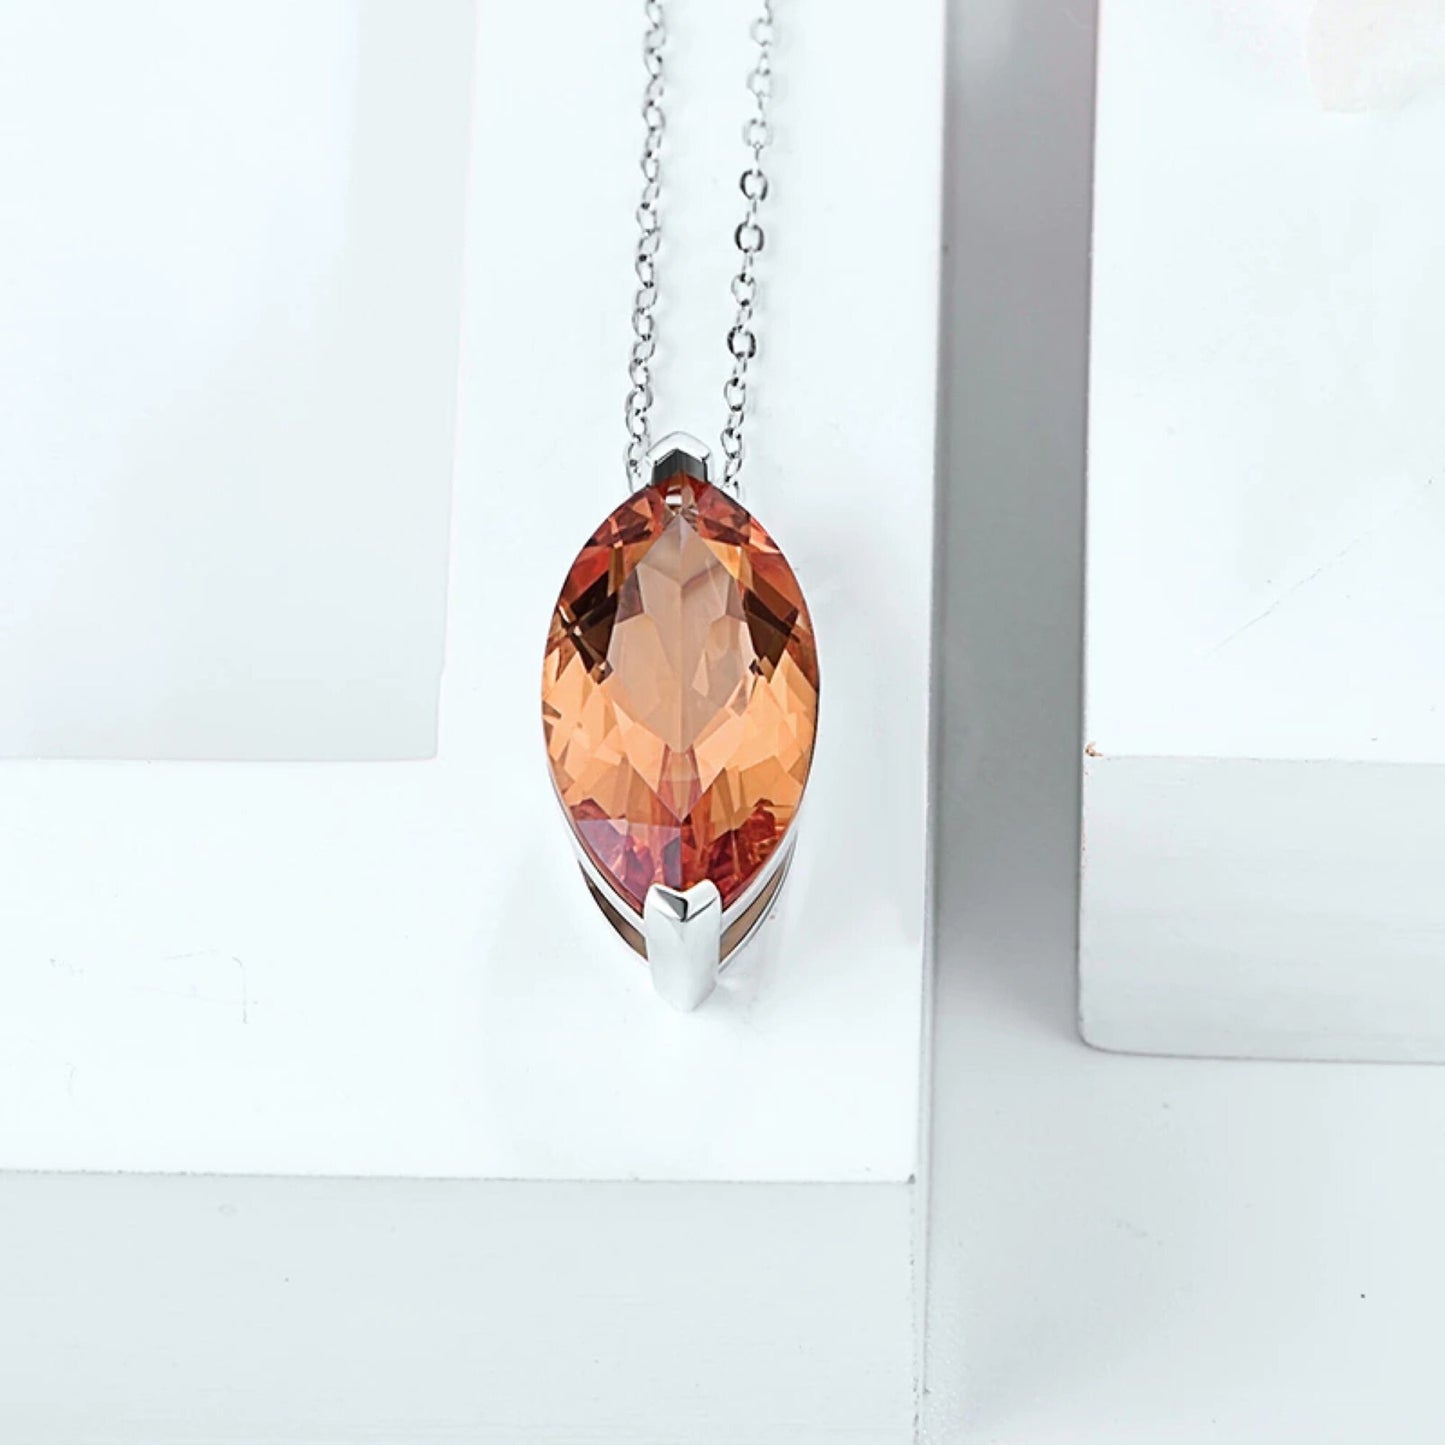 Zultanite 925 Silver Pendant Necklace, Marquise Cut 1.45 Grams Created Zultanite Necklace